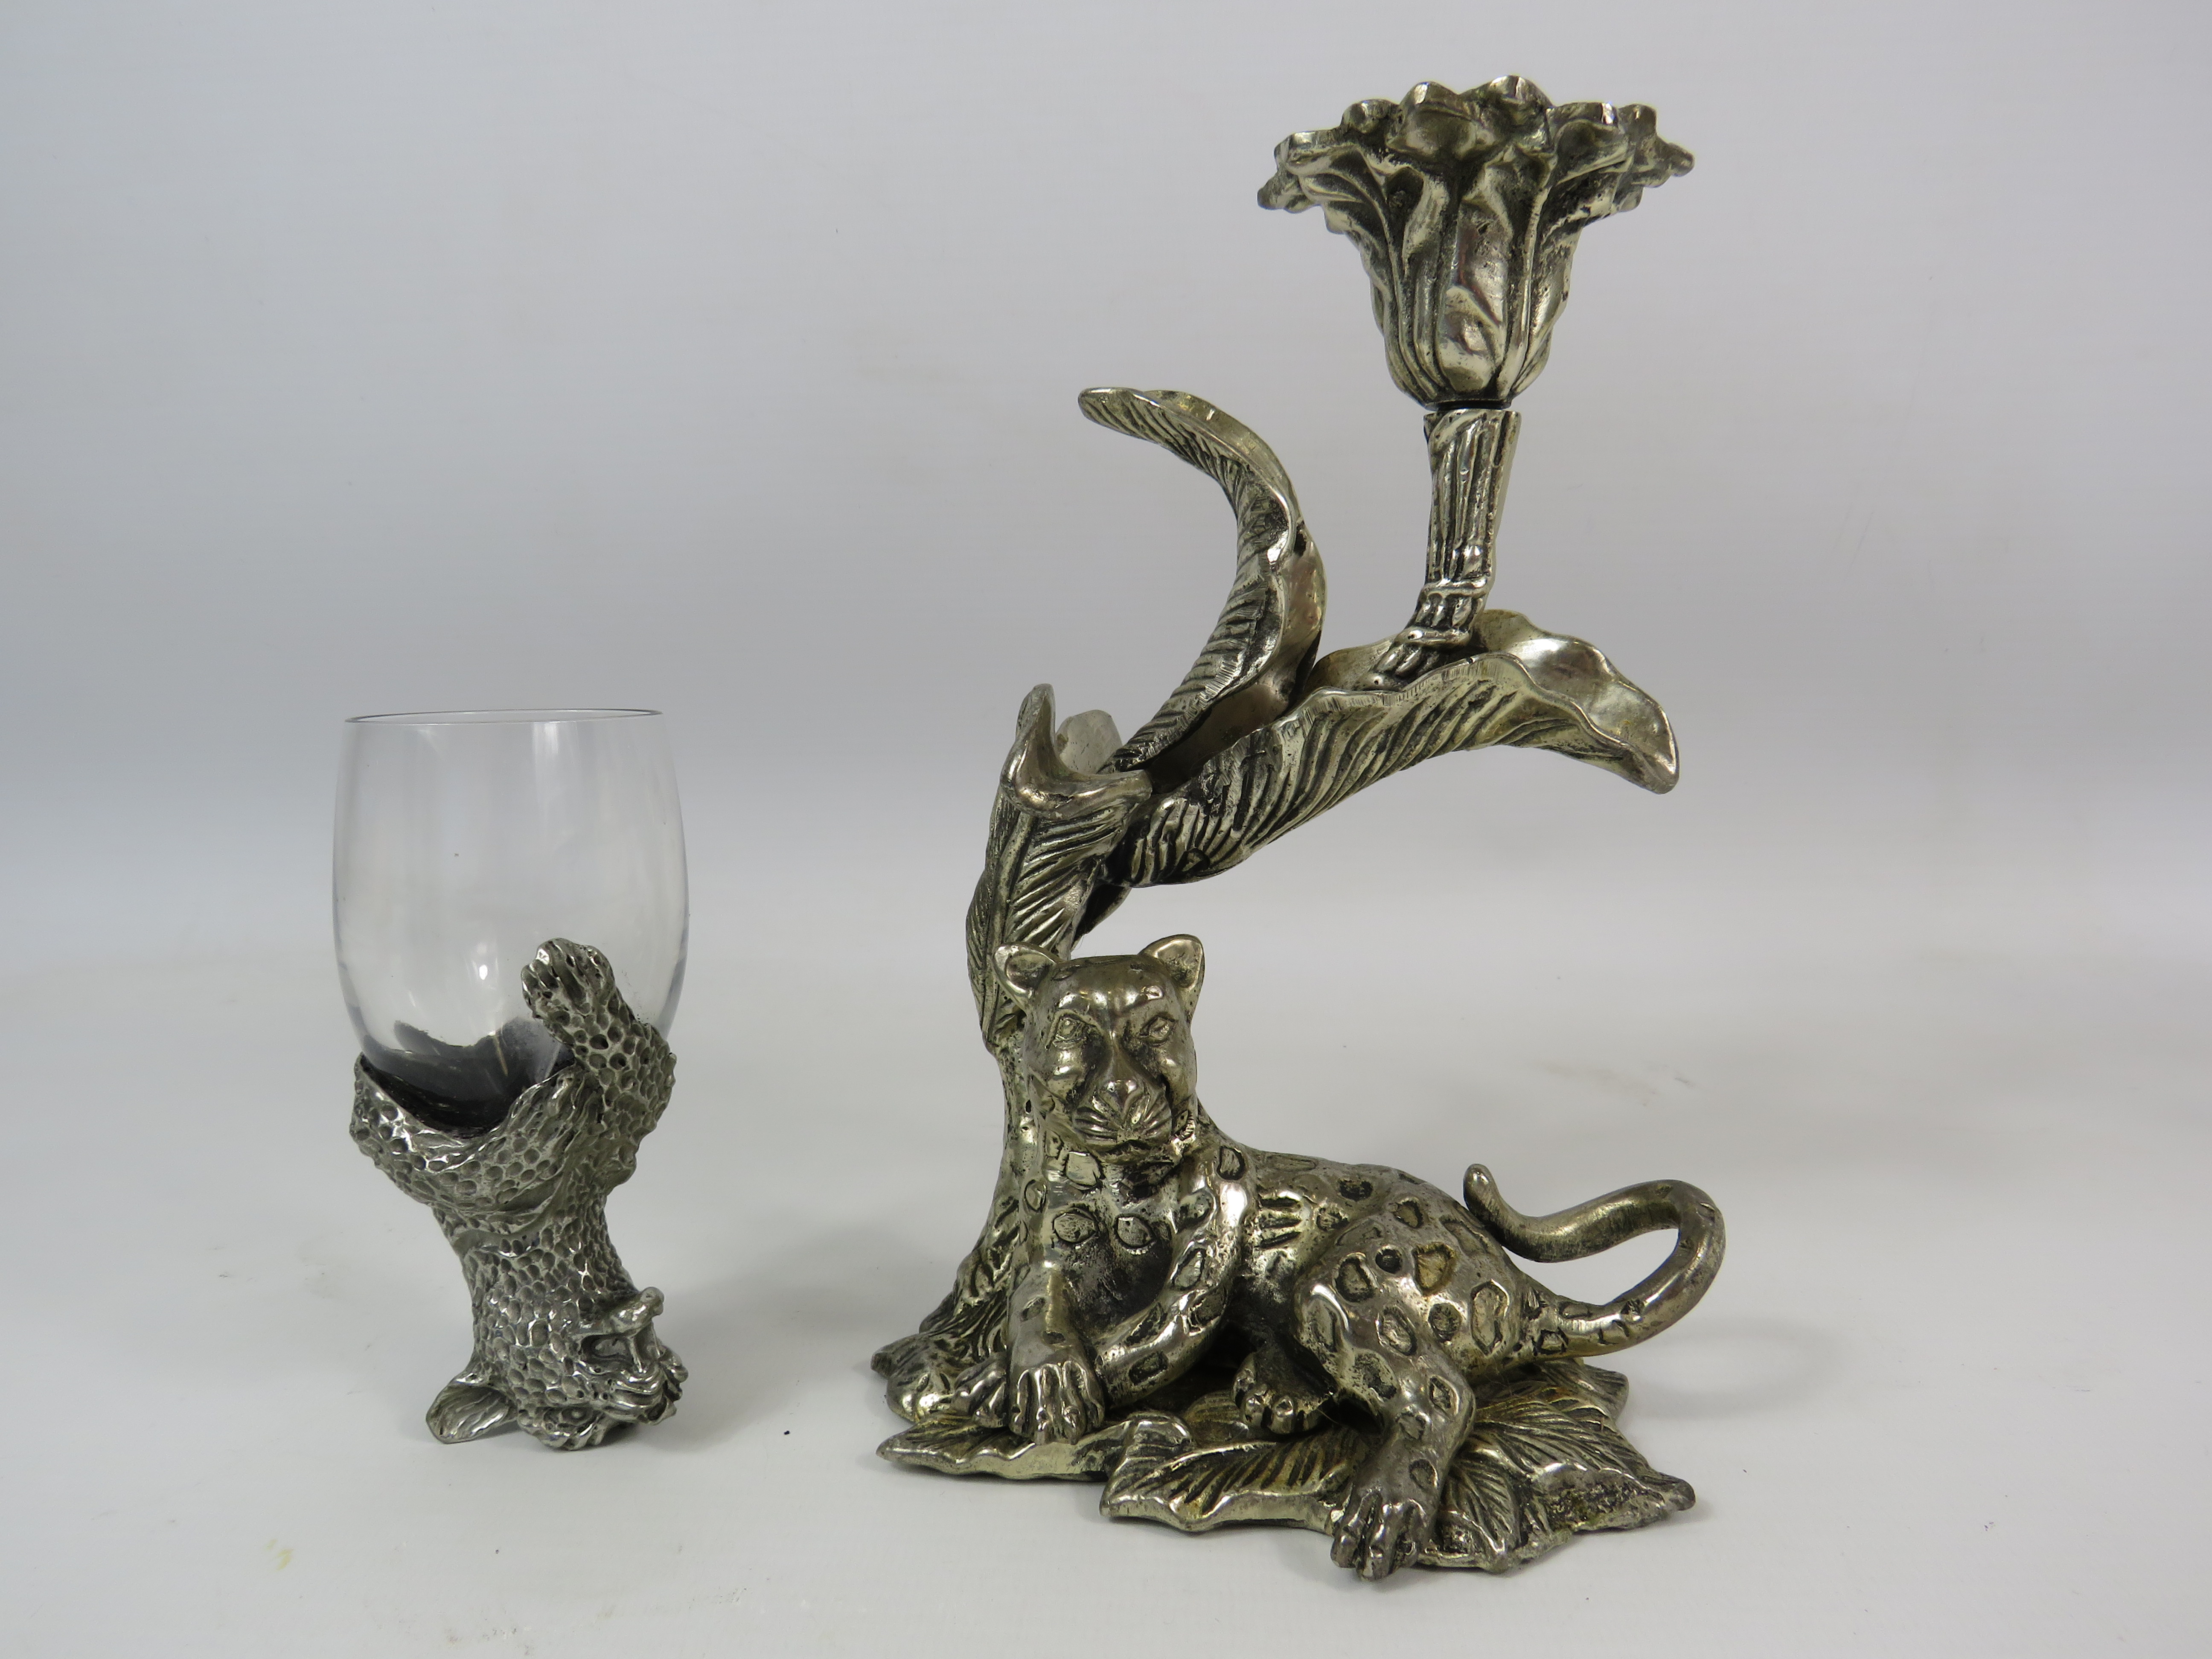 Franklin Wild Royal Selangor stirrup cup plus a white metal candle holder with a recumbant leopard - Image 2 of 3